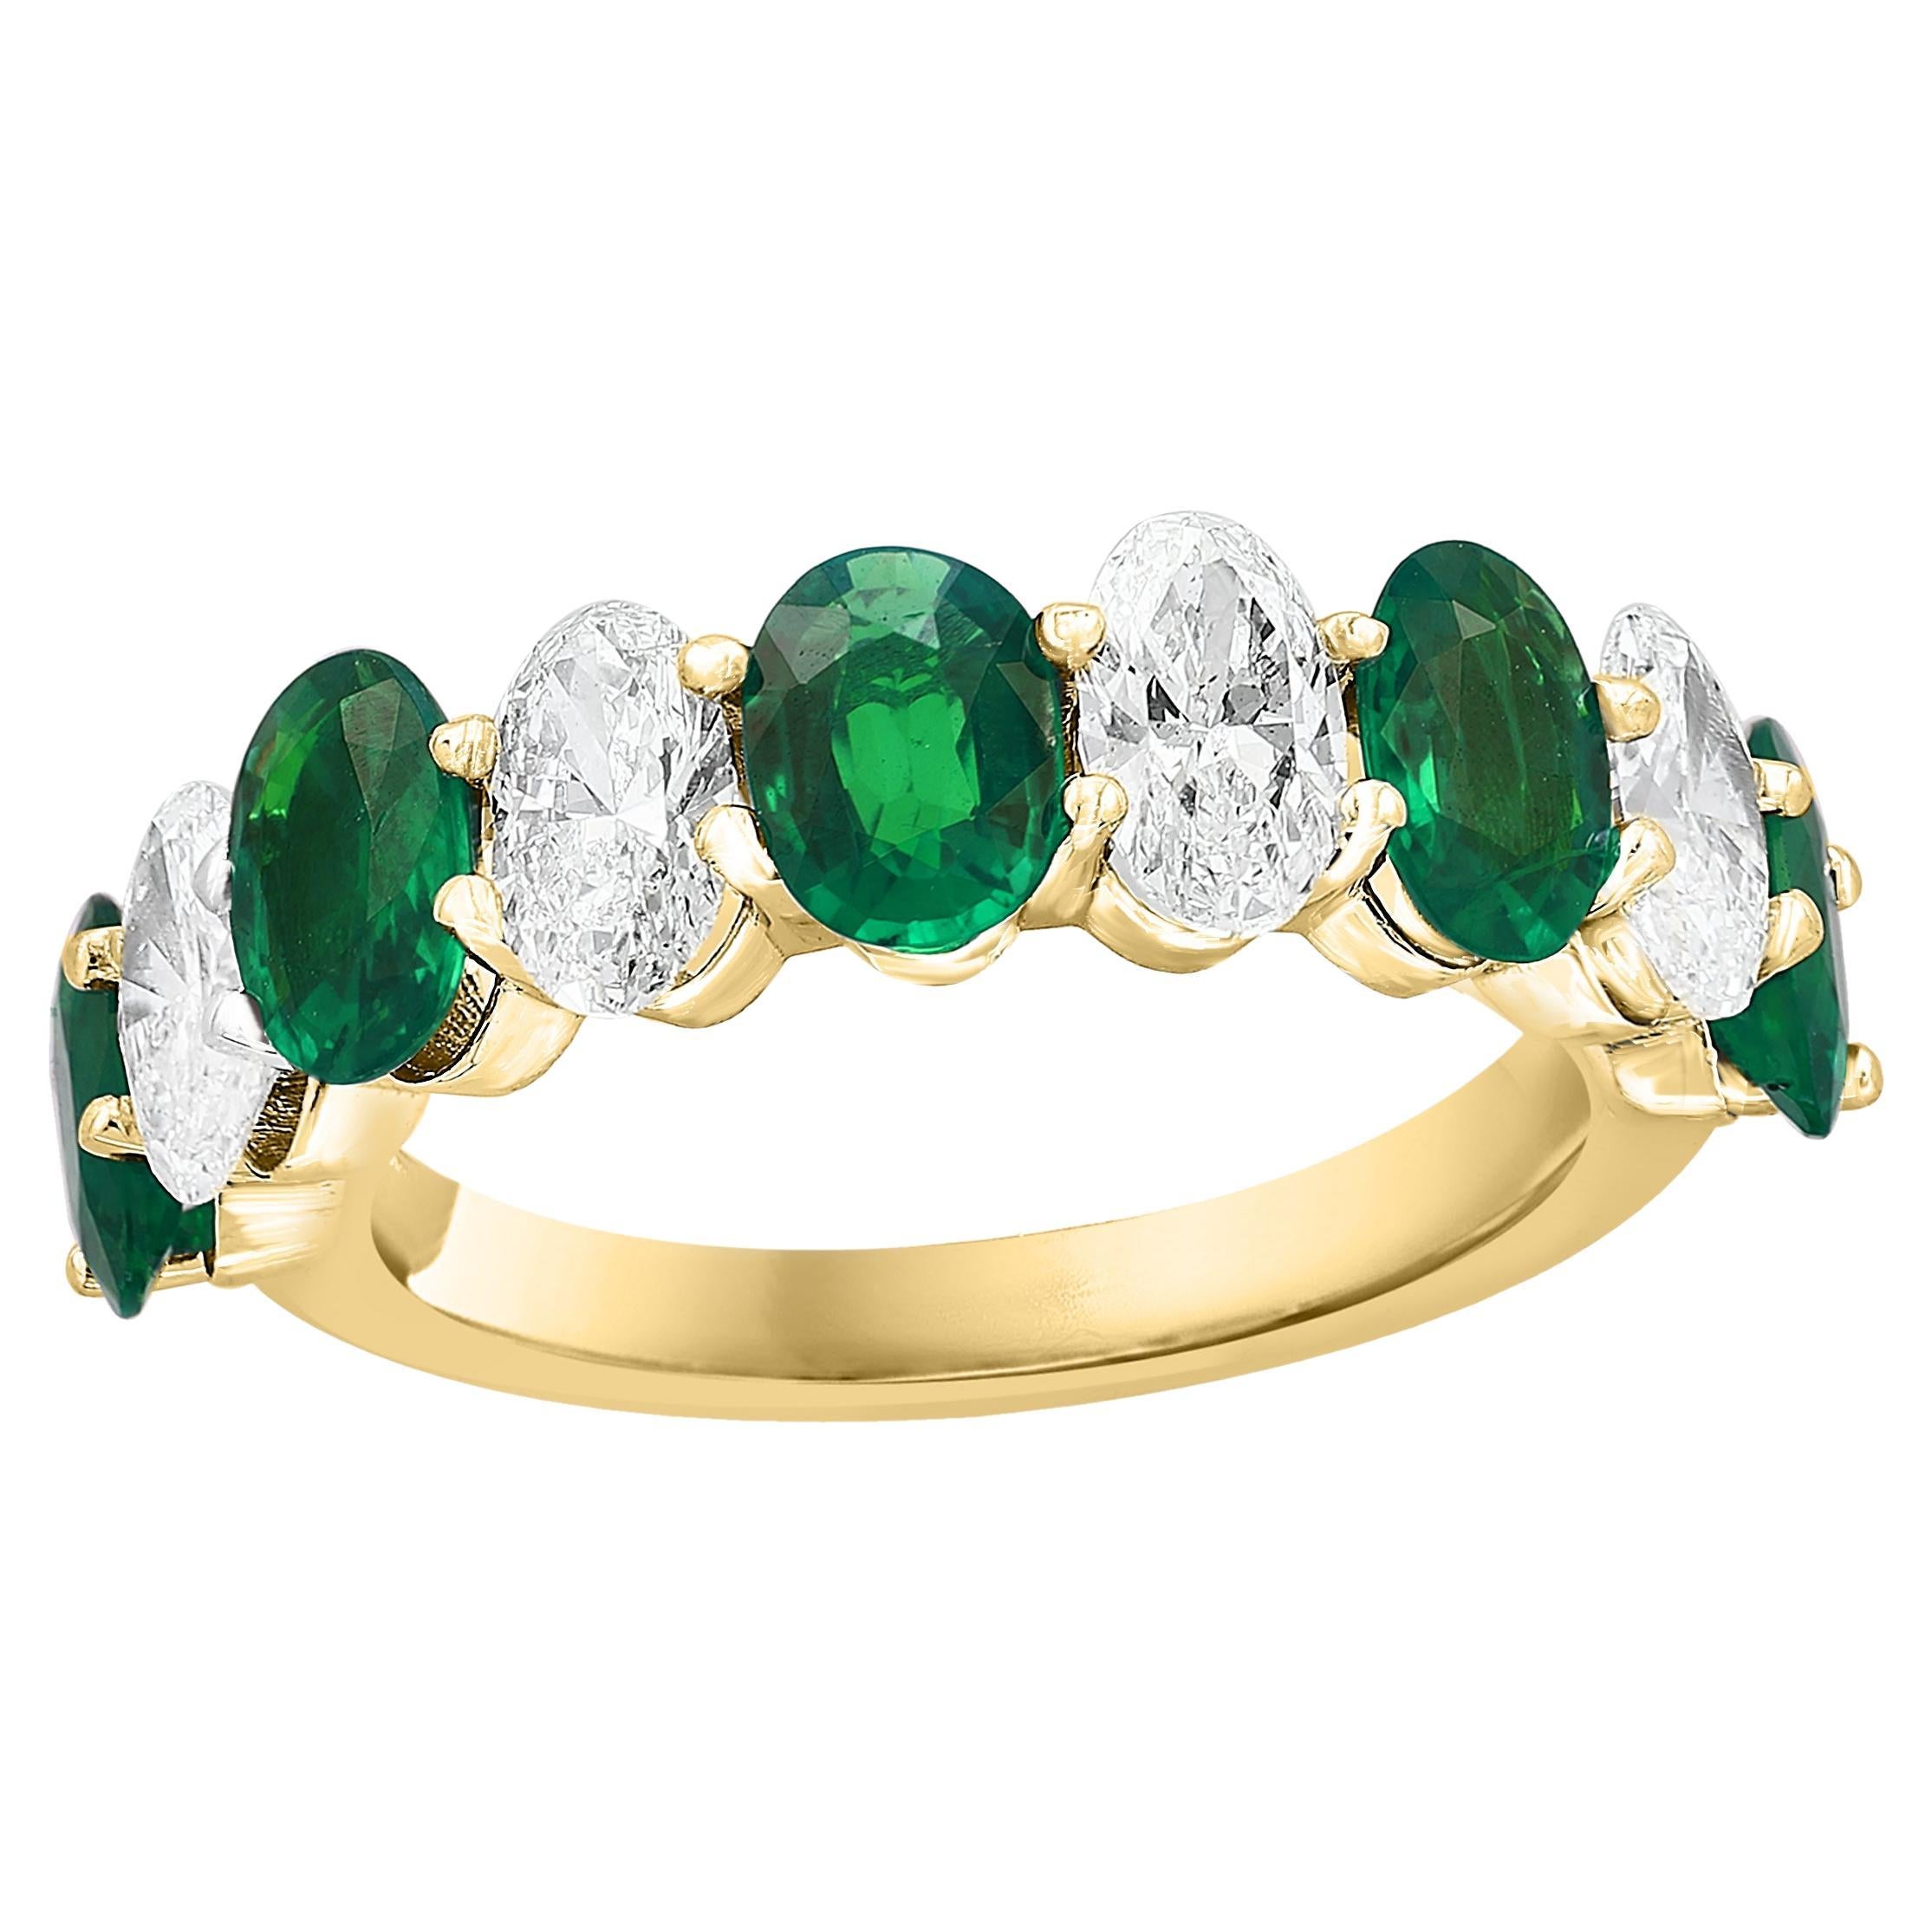 1.89 carat Oval Cut Emerald Diamond Eternity Wedding Band in 14K Yellow Gold For Sale